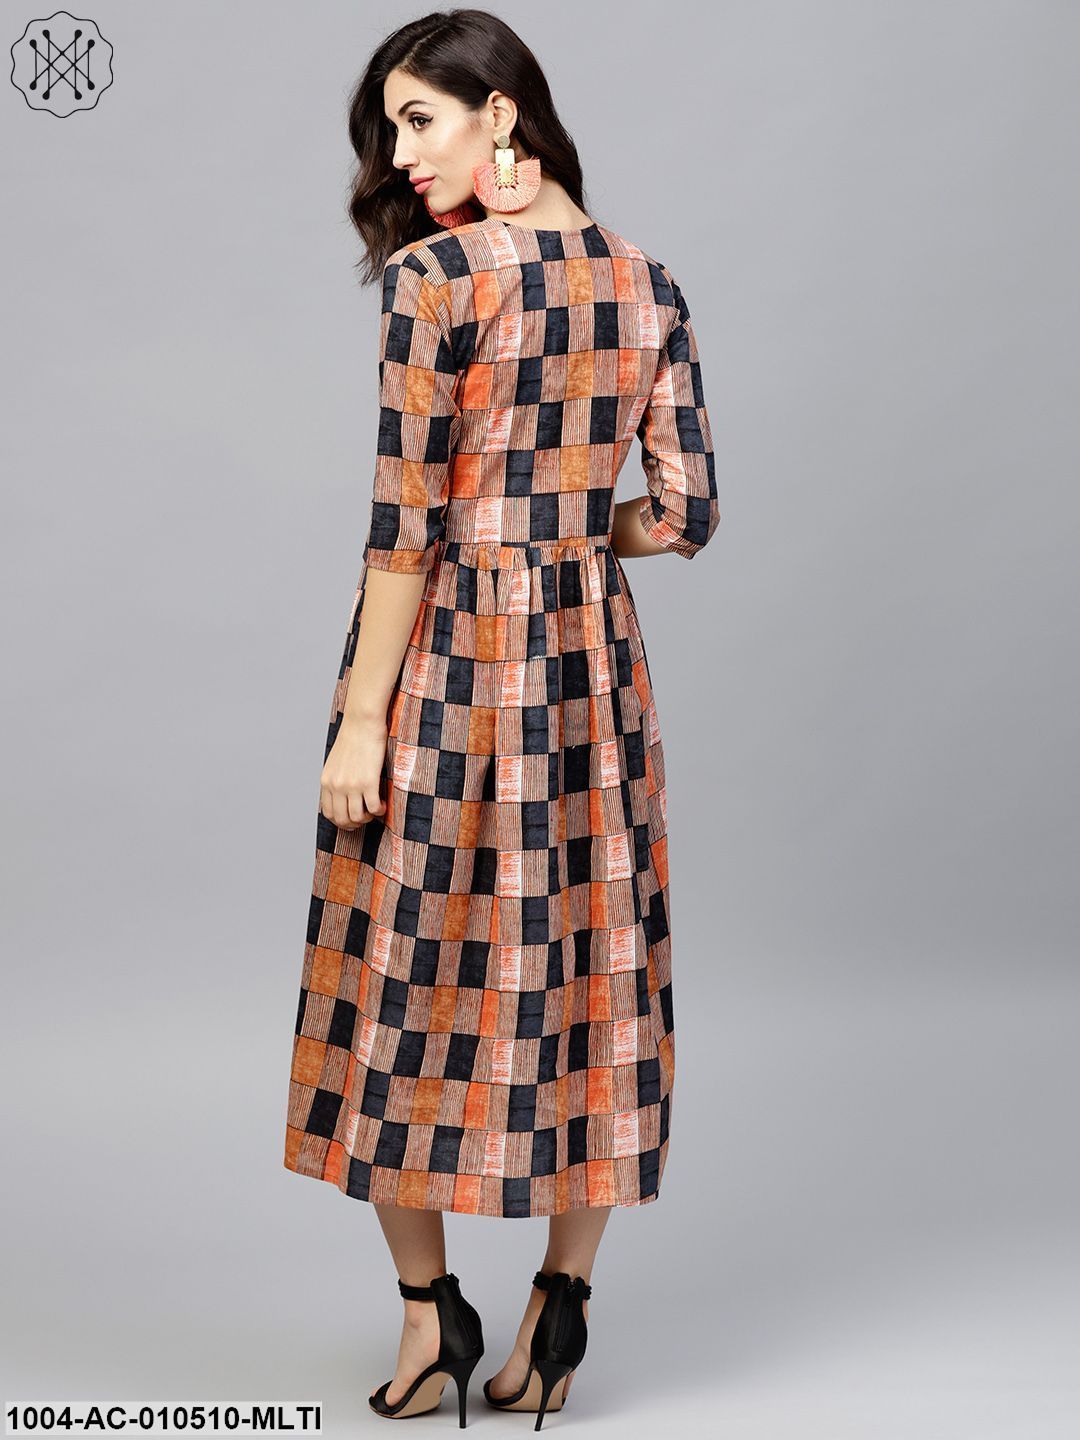 Multi ColoredRound Neck Checked Dress With Front Placket And 3/4 Sleeves